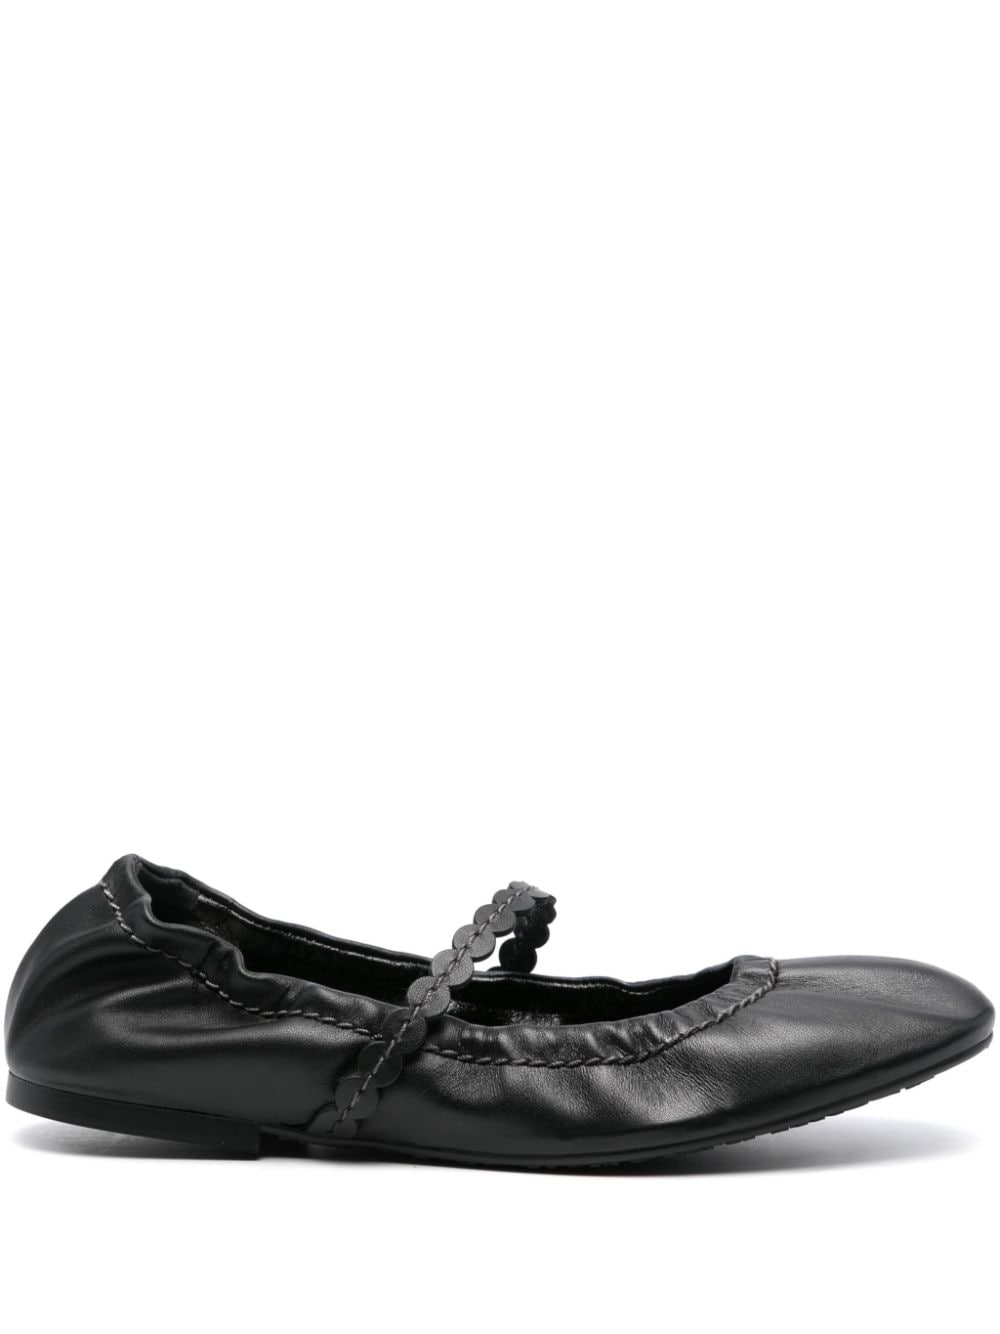 See by Chloé scallop-strap ballerina shoes - Black von See by Chloé